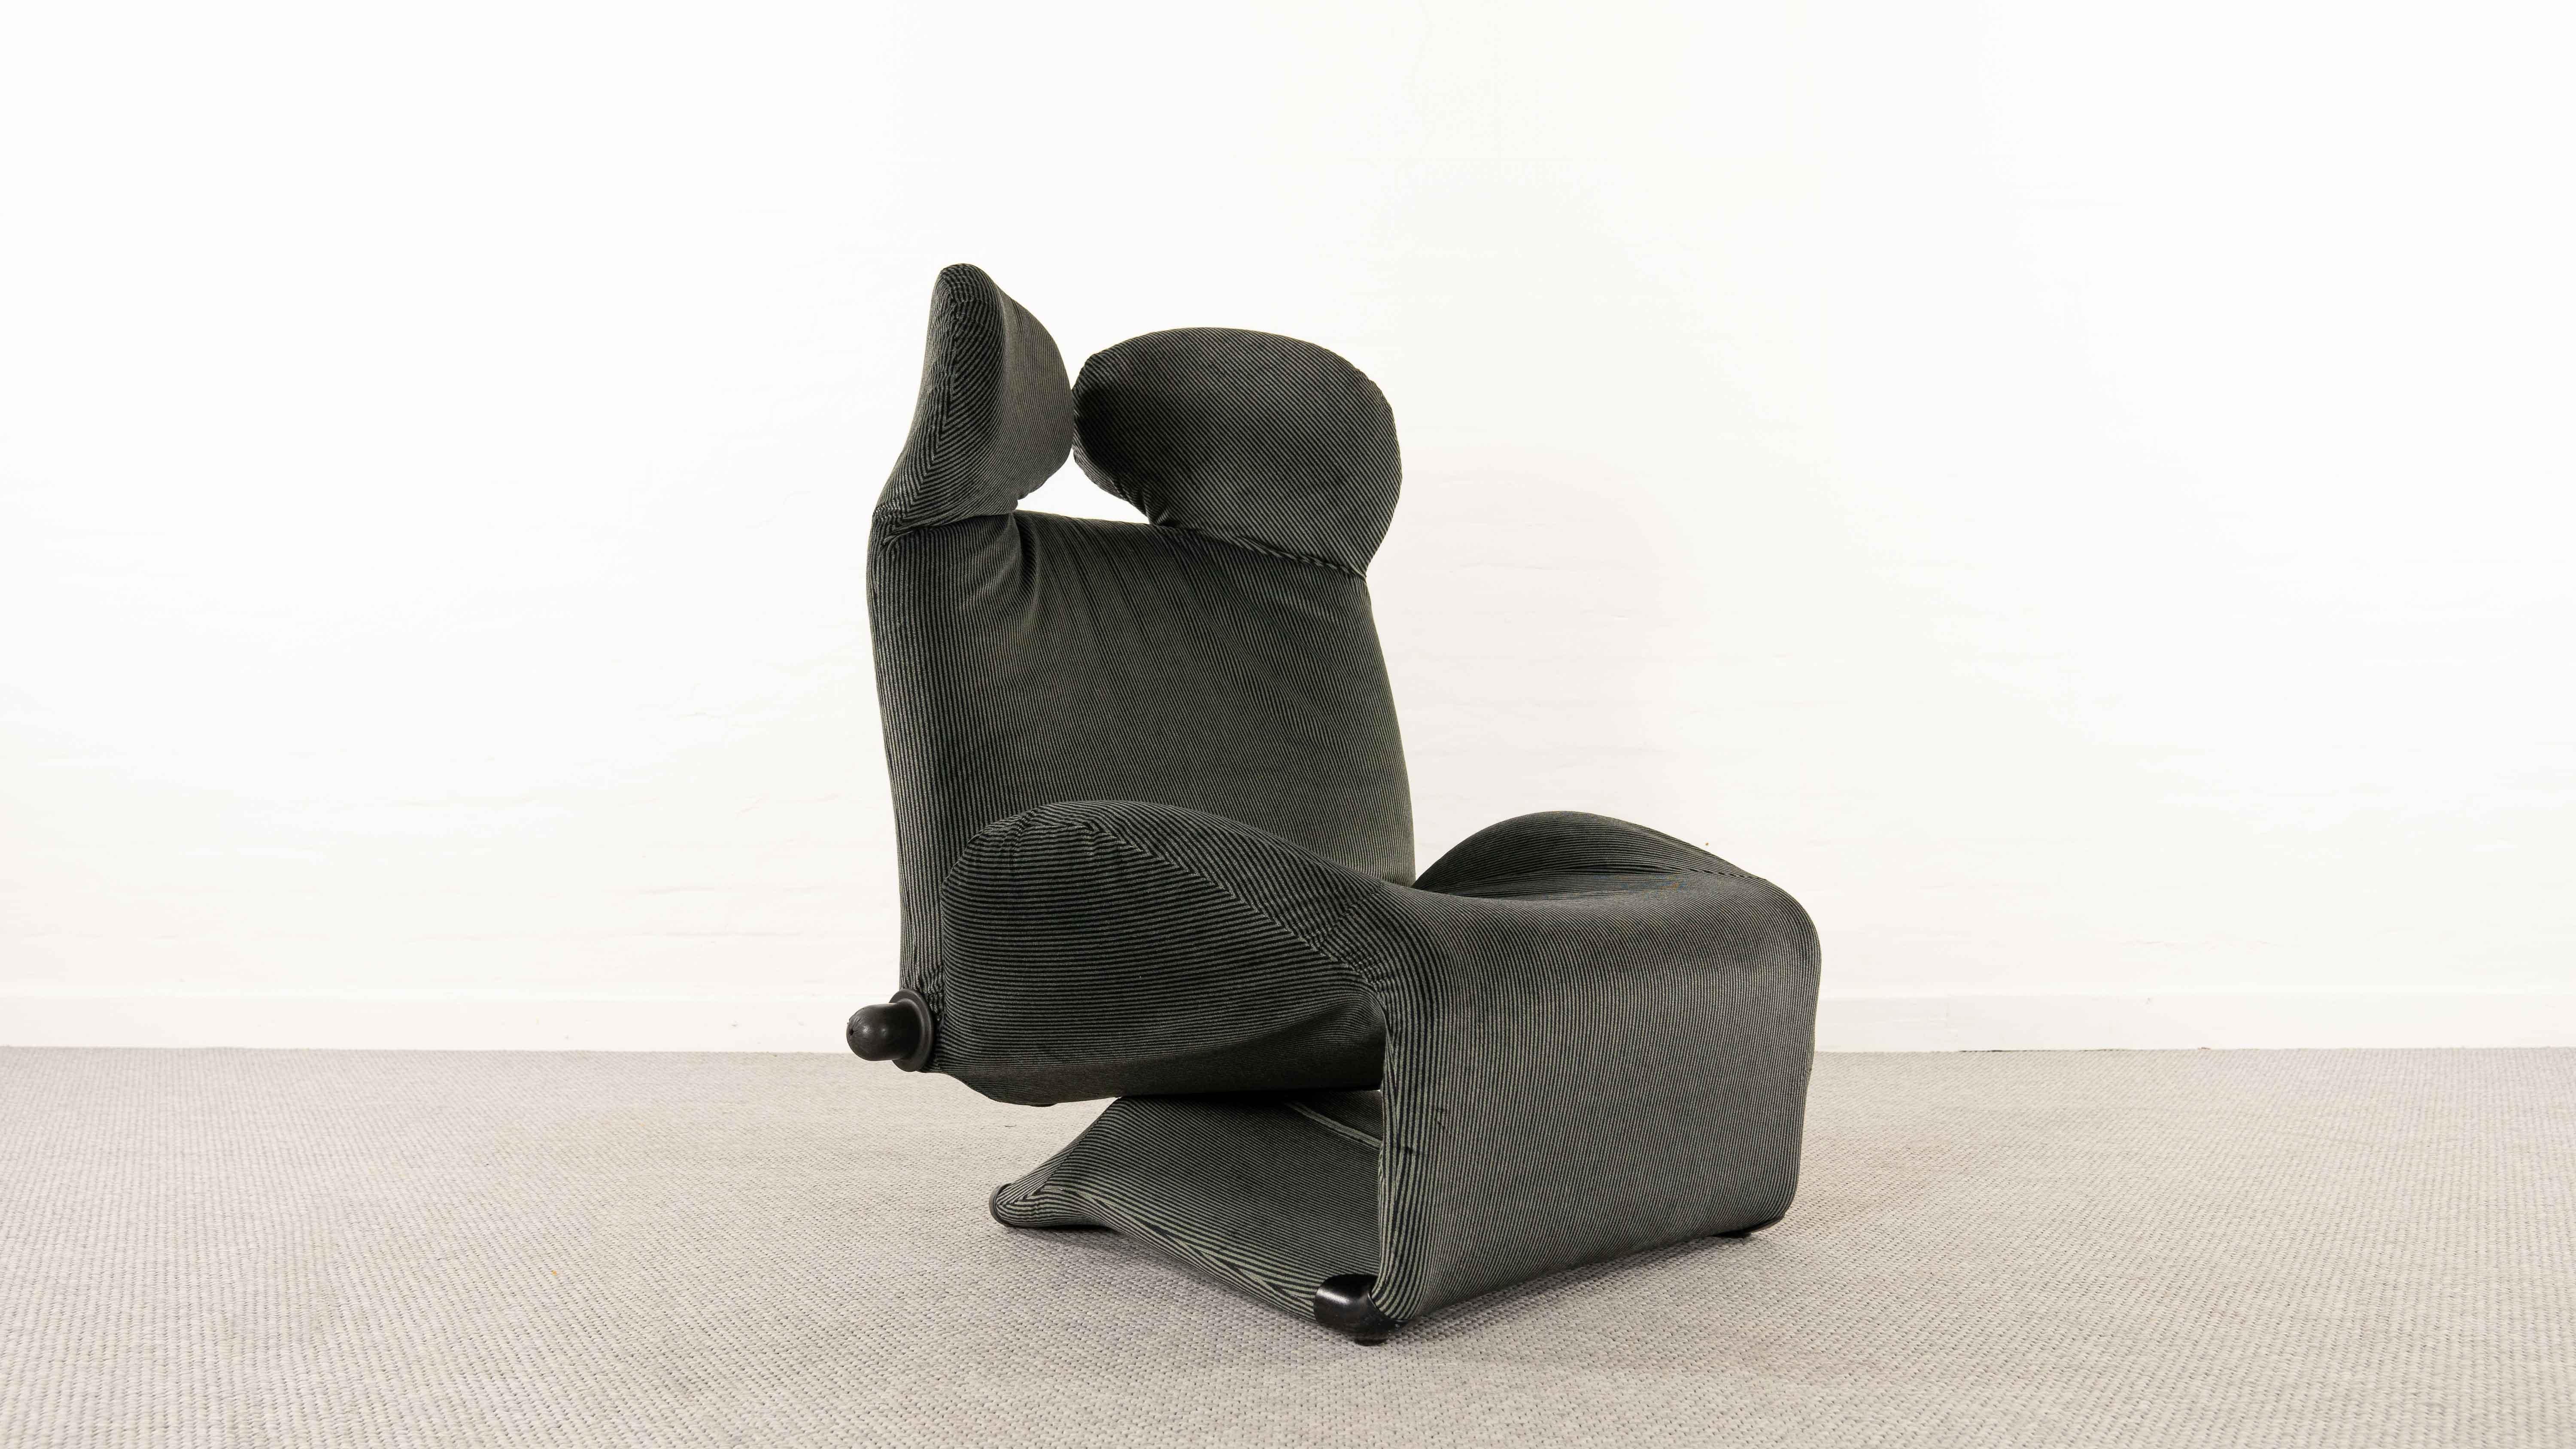 Famous so called “Micky Mouse Chair” by Toshiyuki Kita 1980 for Cassina. New upholstered in striped Maralunga fabrics. Various adjustable Easy Chair. The backrest can be adjusted by a turningknob, like in a car. By folding out the footrest, the